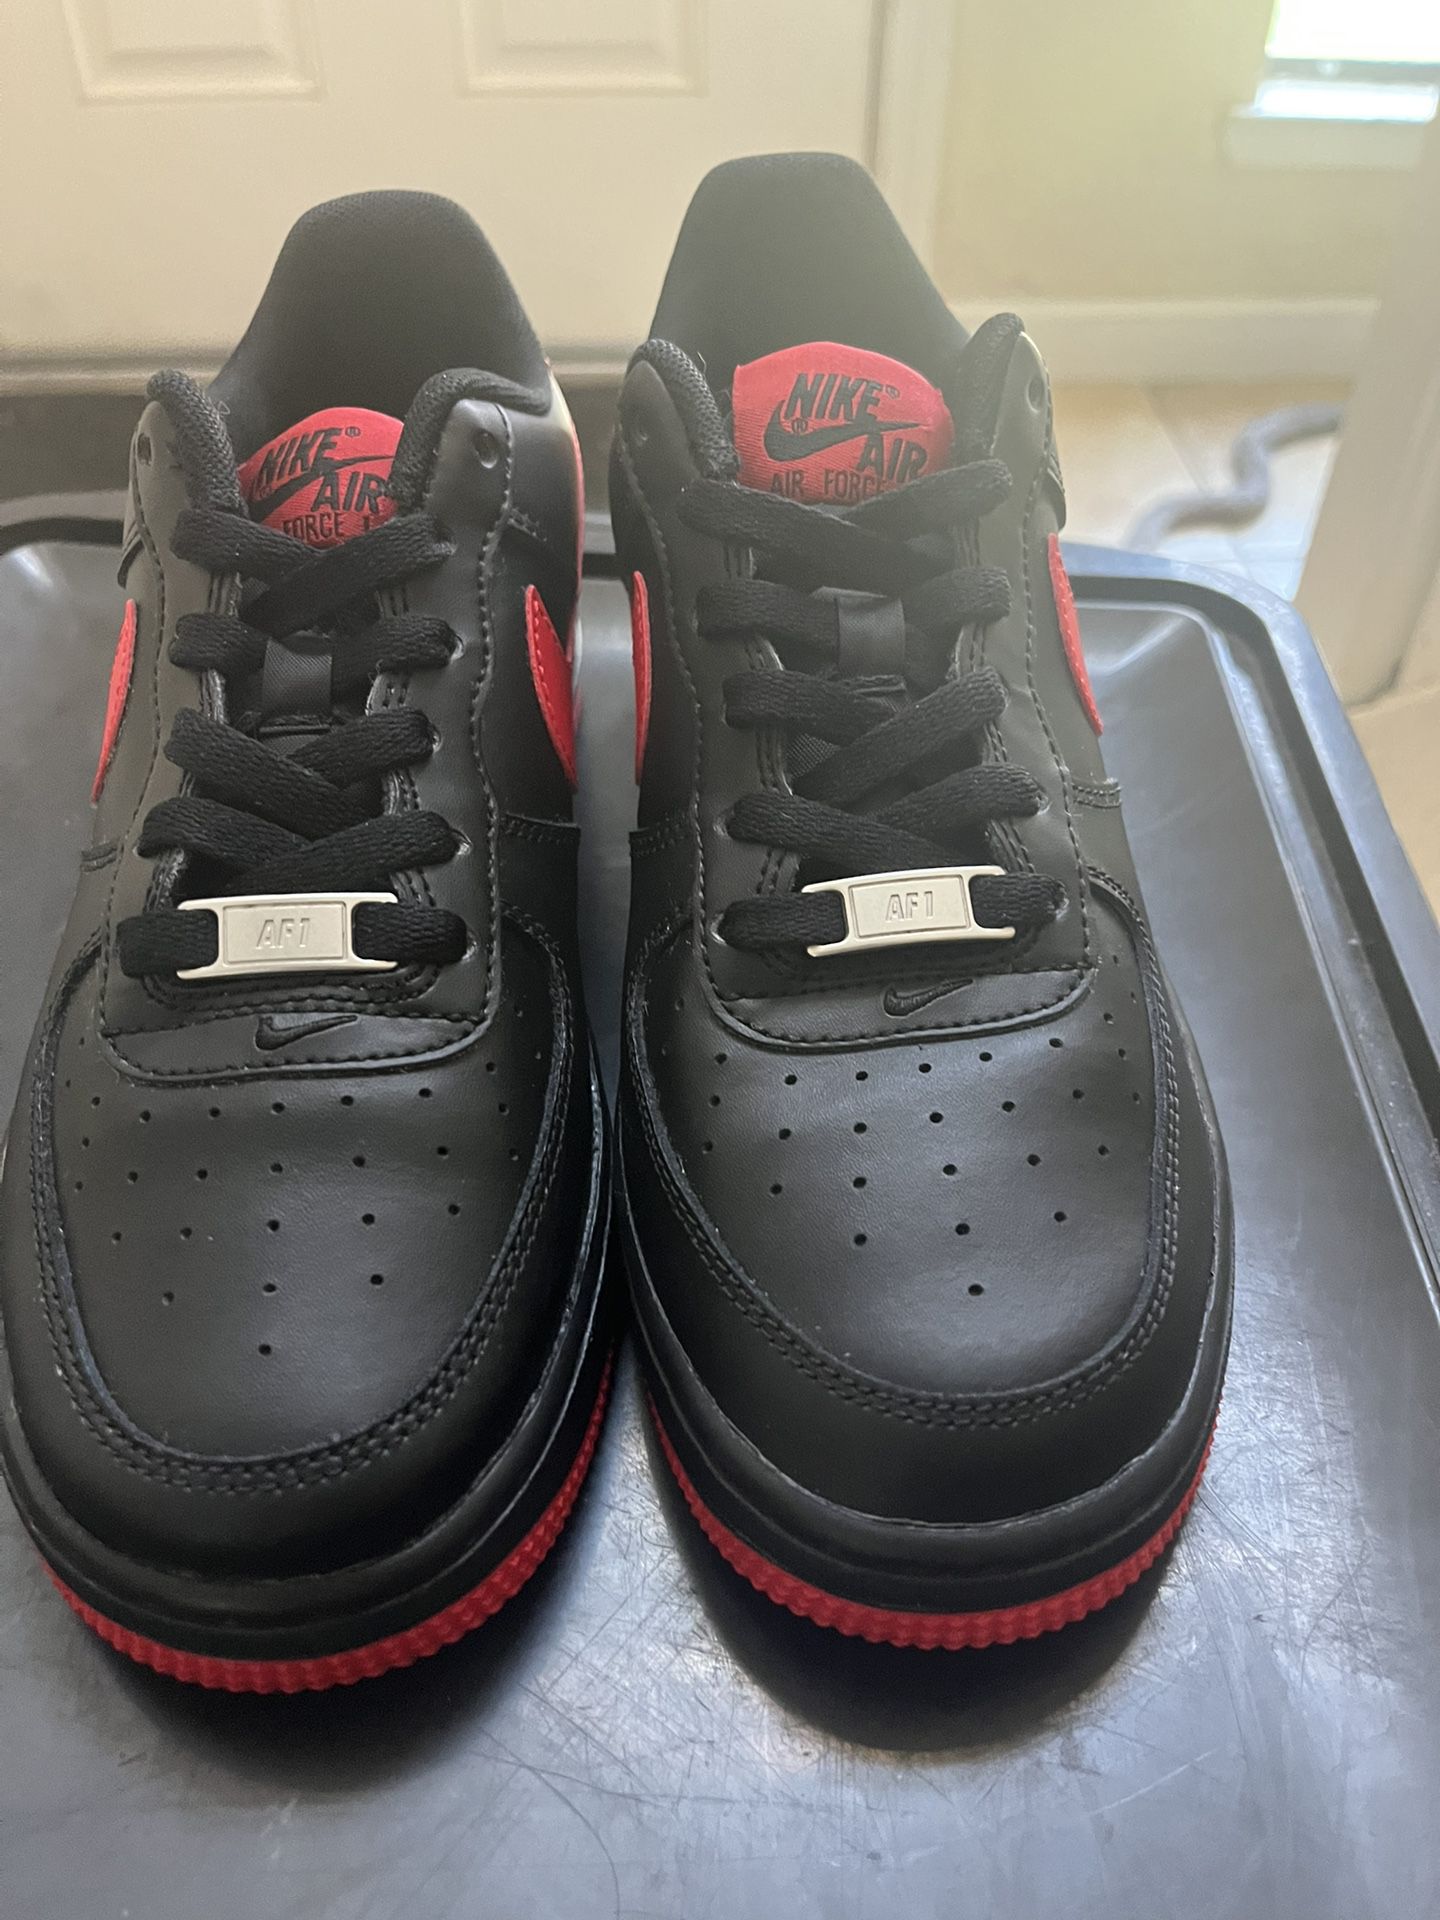 Custom Nike Air Force 1 (Worn Only Once, Basically Brand New) for